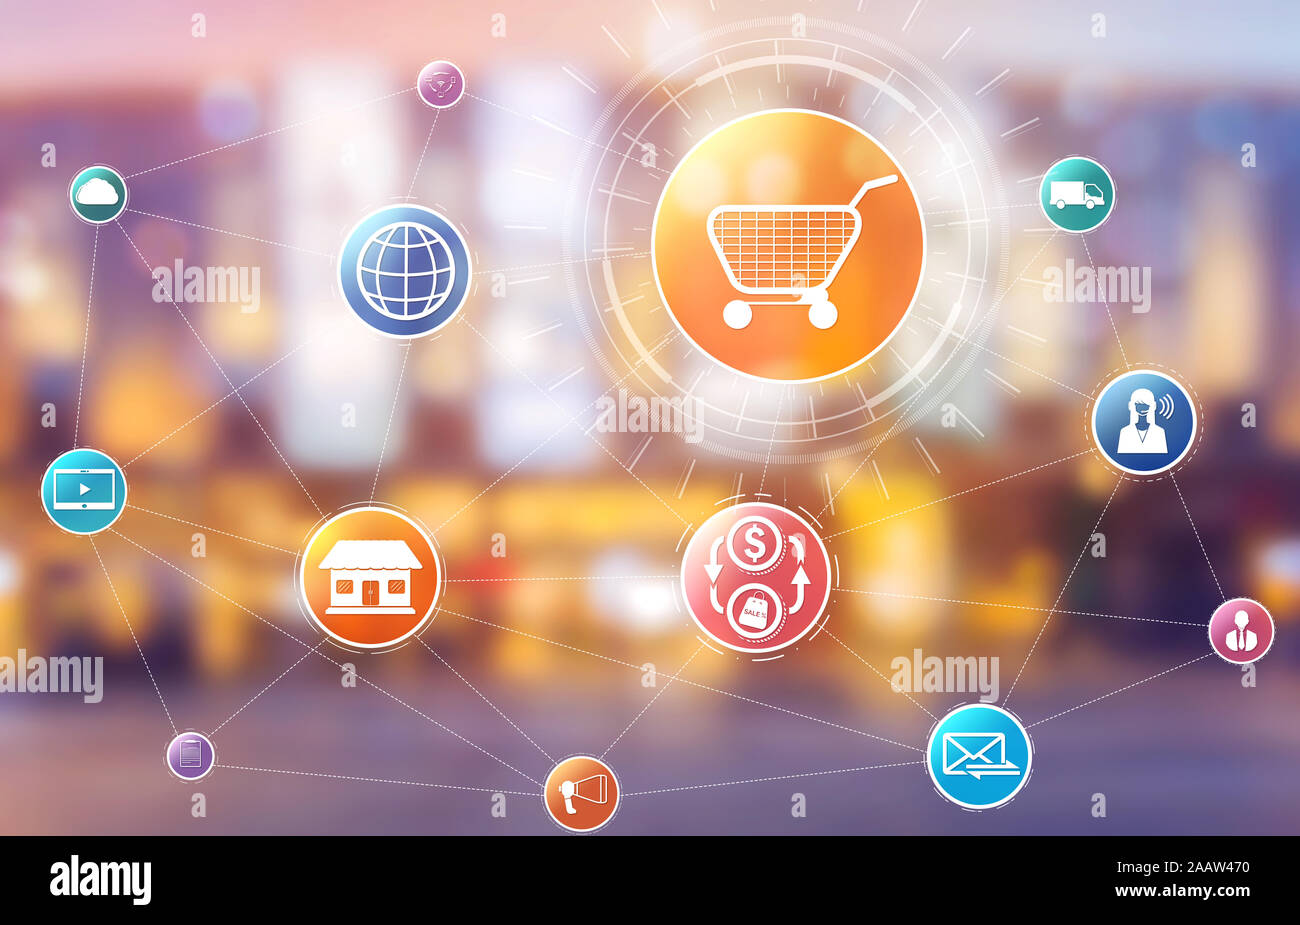 Omni channel technology of online retail business. Multichannel marketing  on social media network platform offer service of internet payment channel  Stock Photo - Alamy